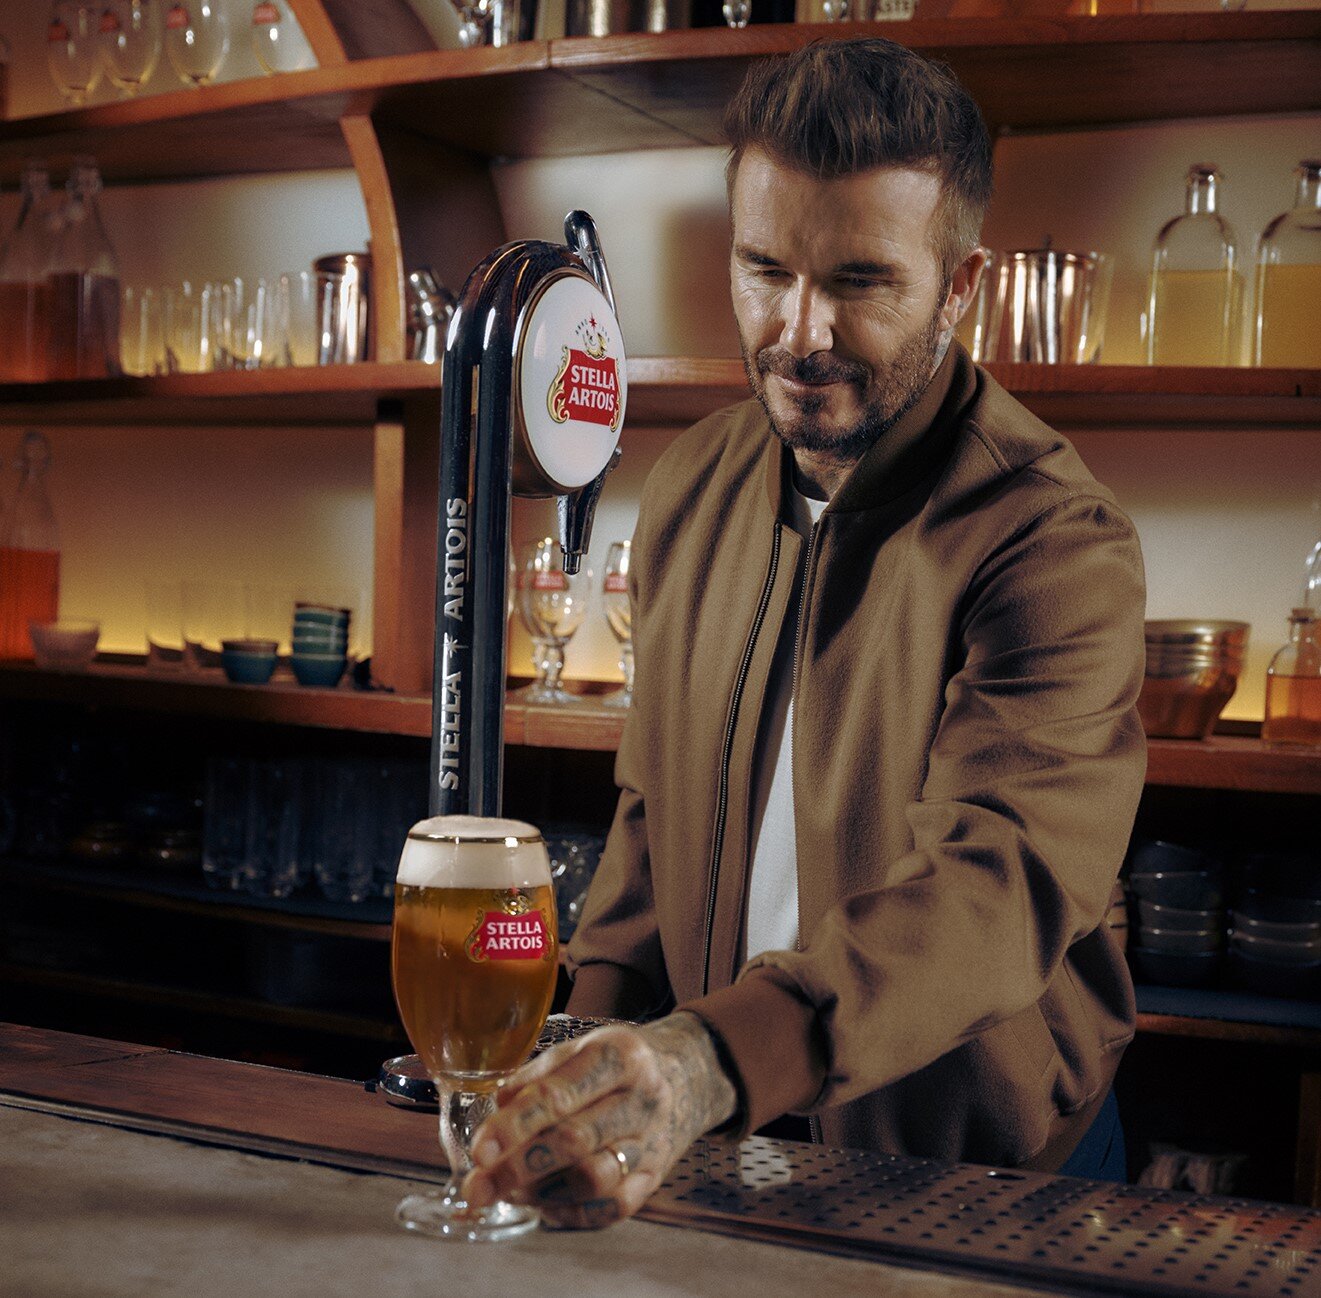 Stella Artois Launches New Campaign “For Moments Worth More” in Partnership with David Beckham 